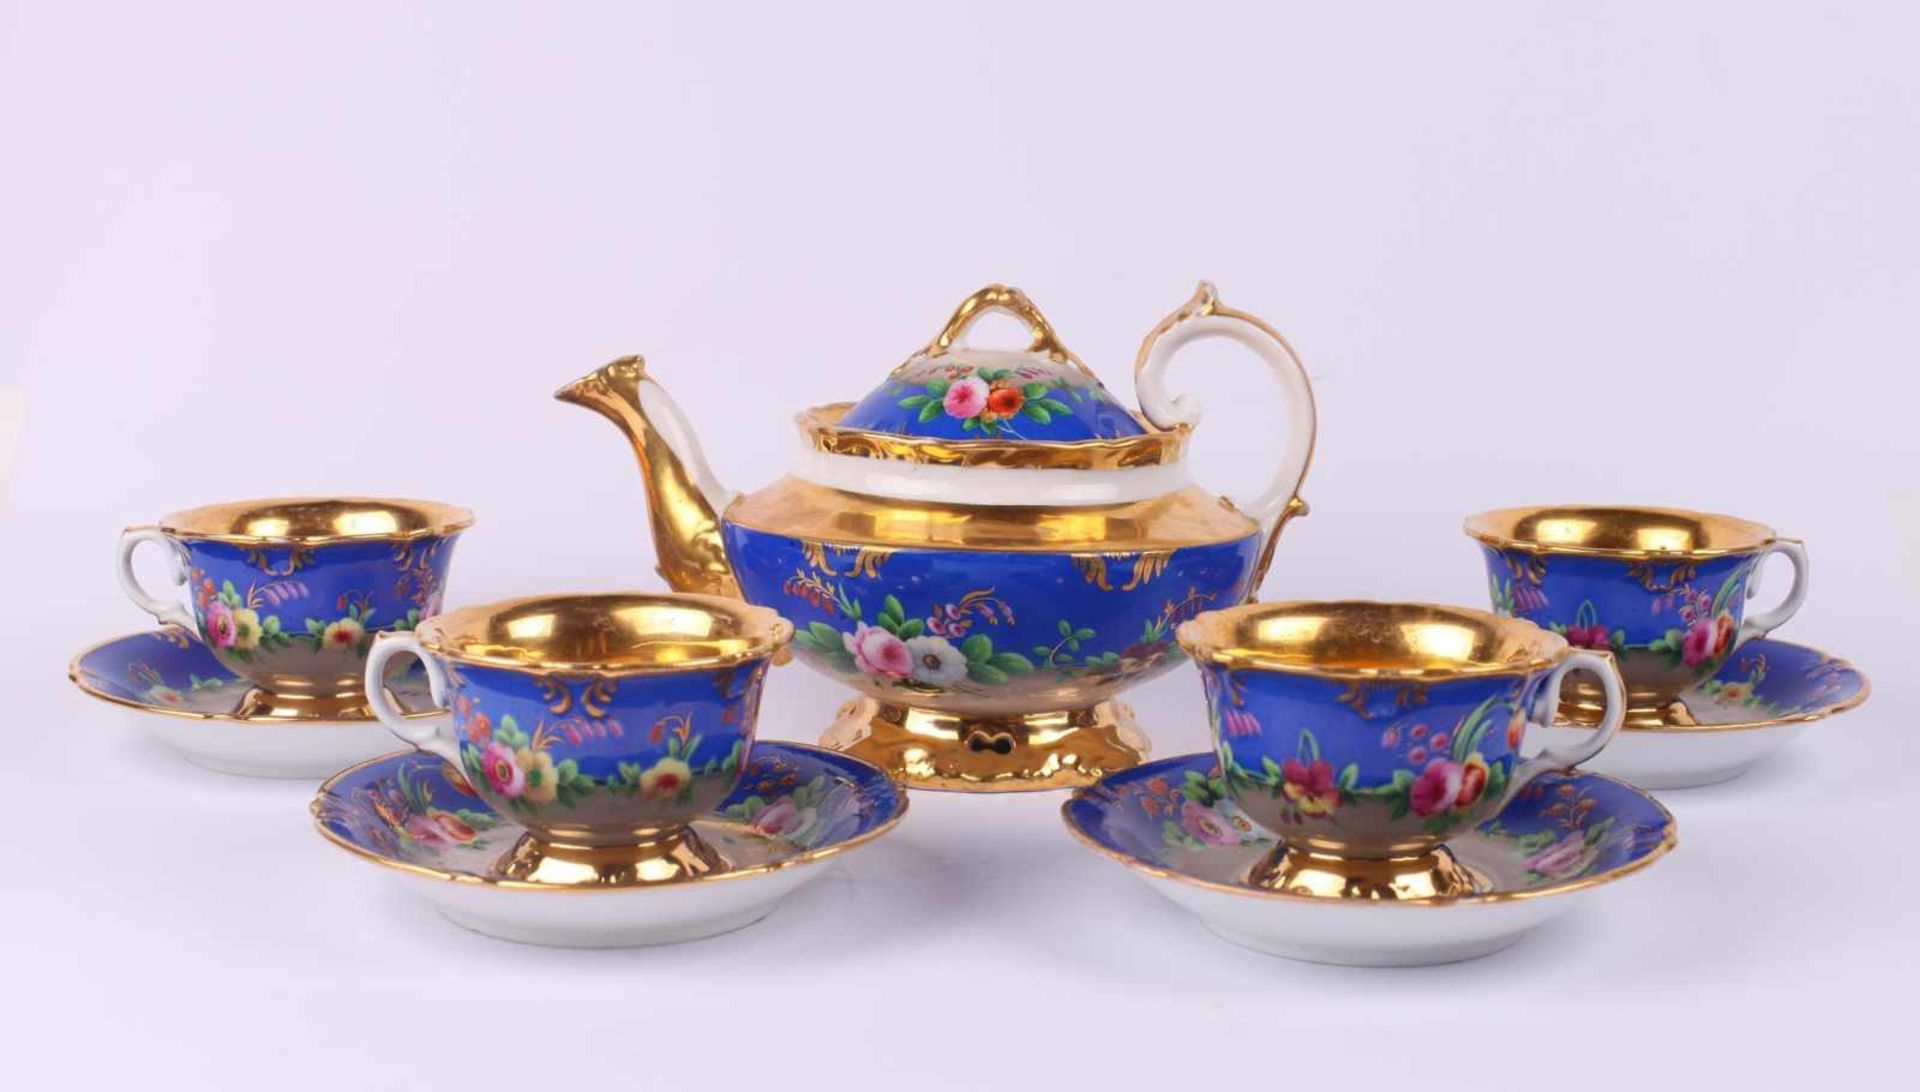 Tea set. 16 pieces: six tea cup and saucer sets, one teapot, one sugar bowl, one milk jug, one dish. - Image 7 of 27